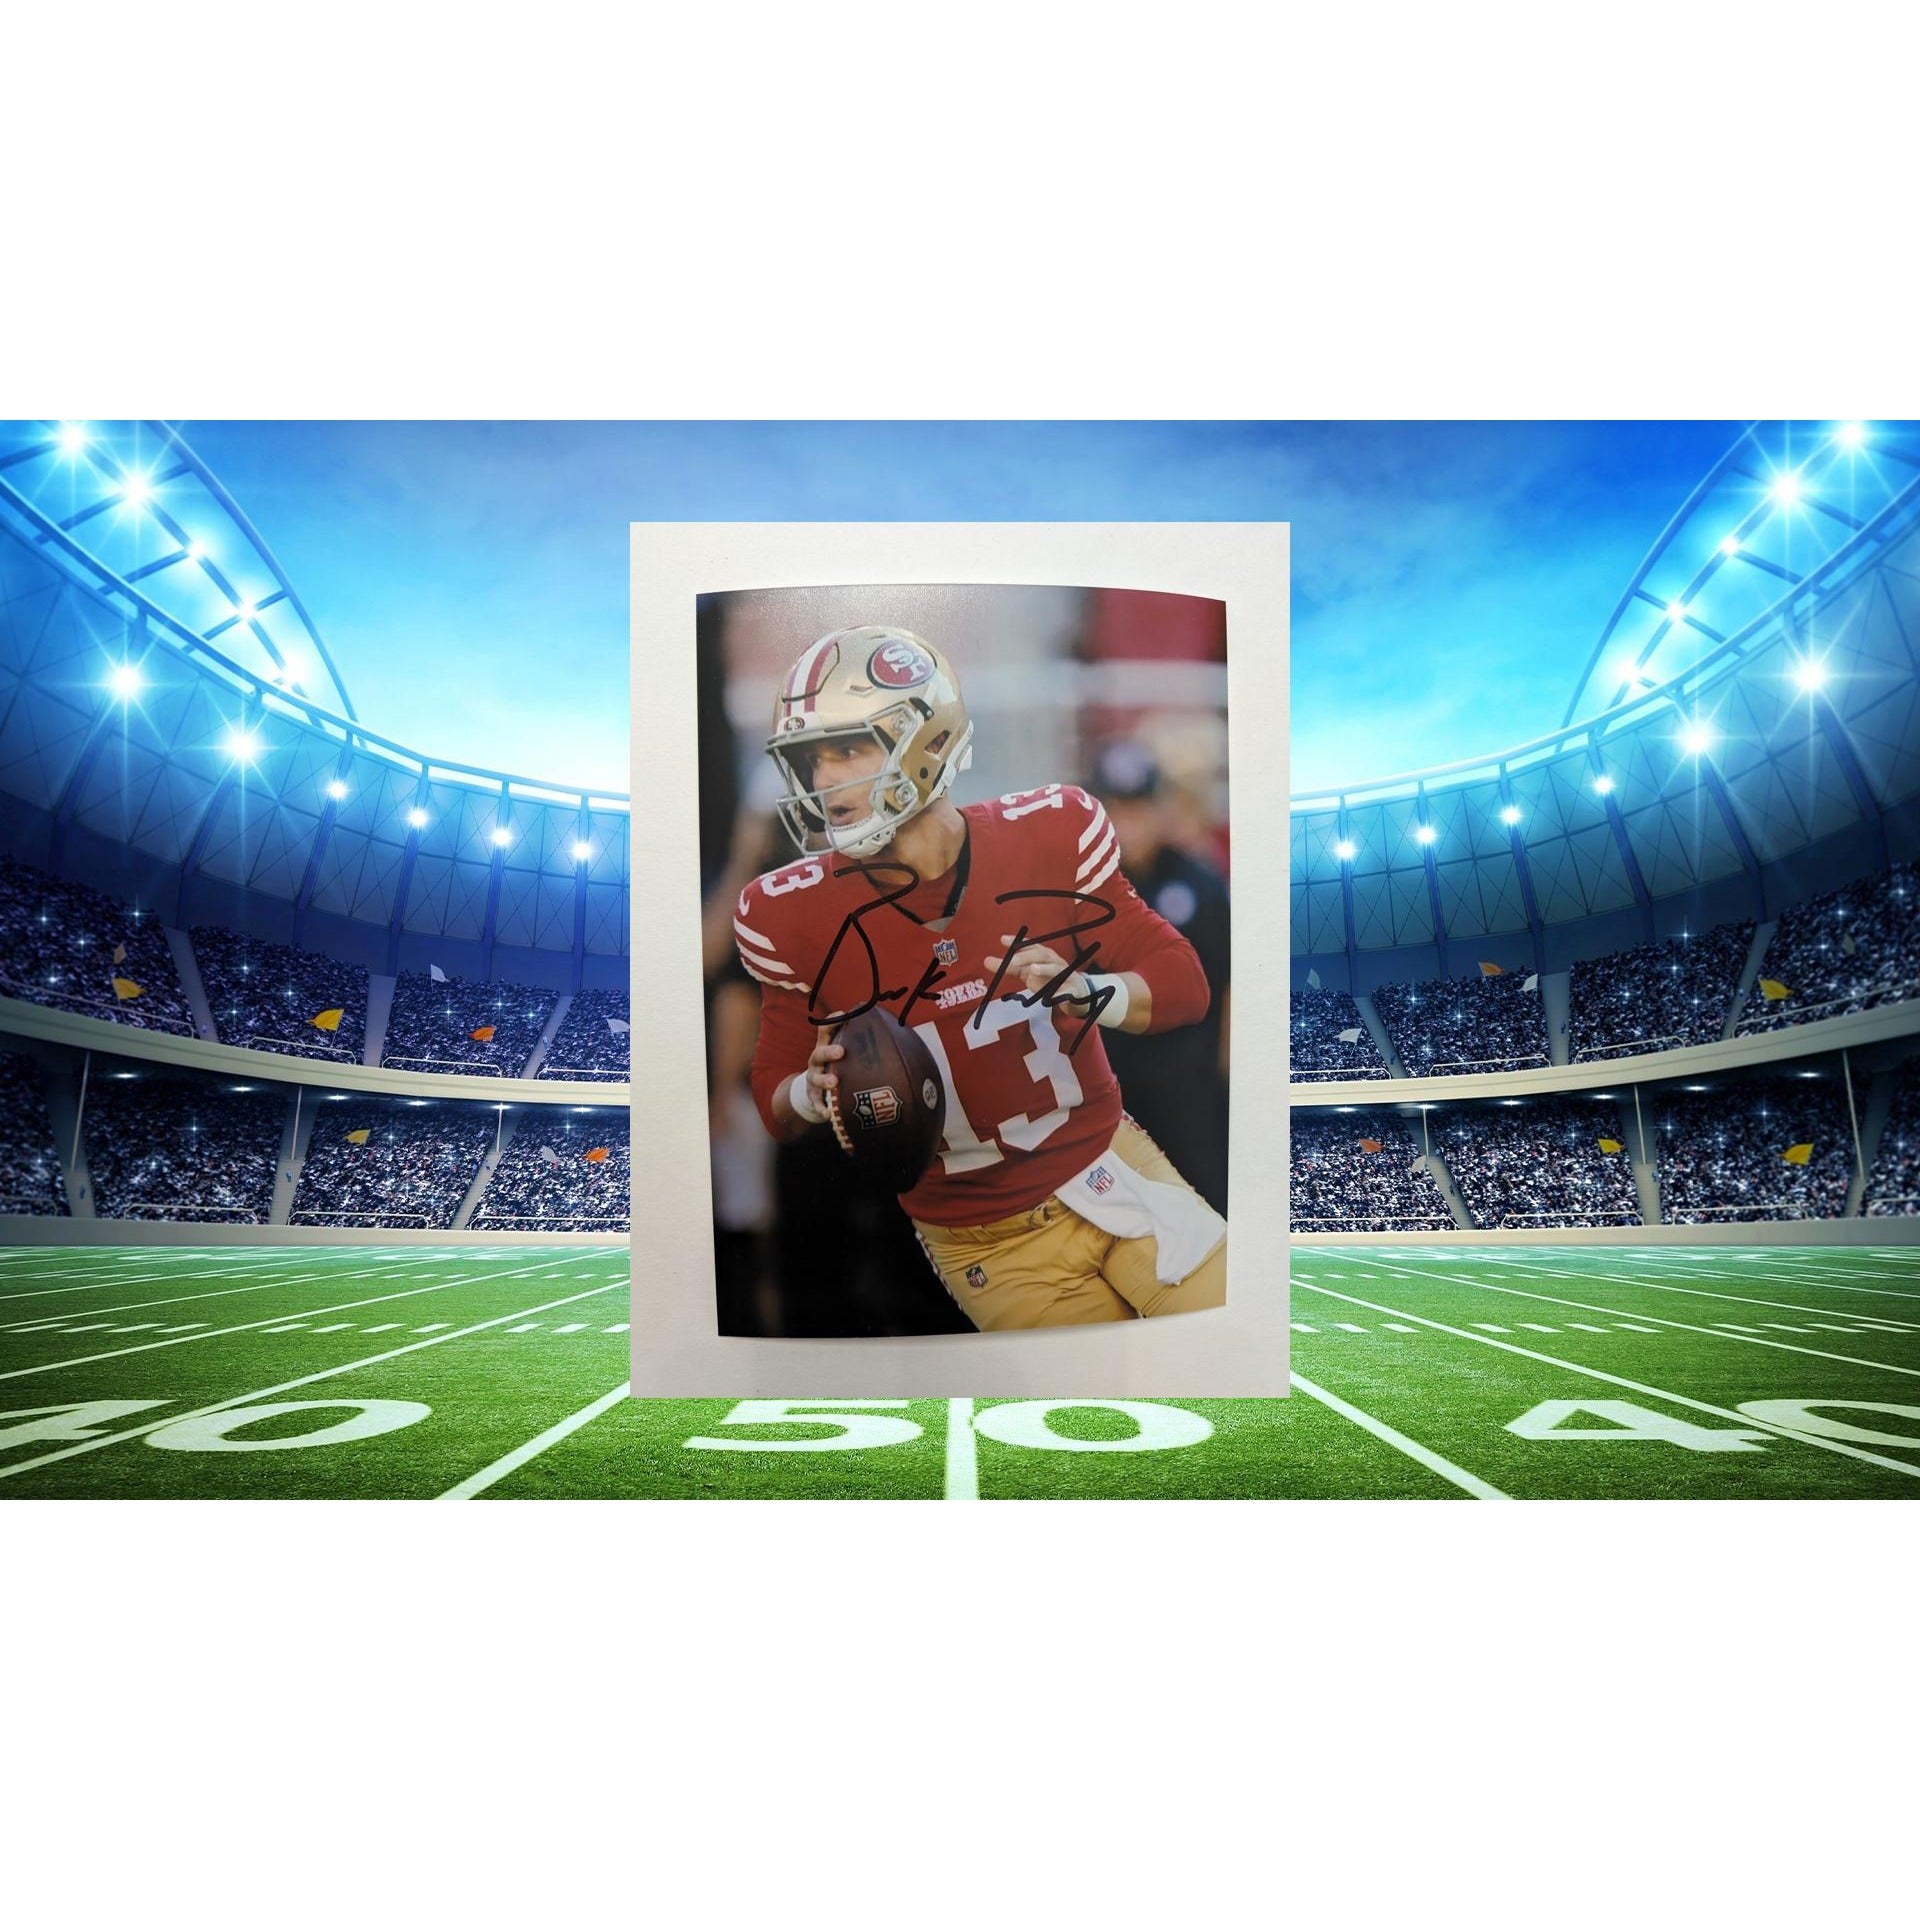 Brock Purdy San Francisco 49ers 5x7 photo signed with proof